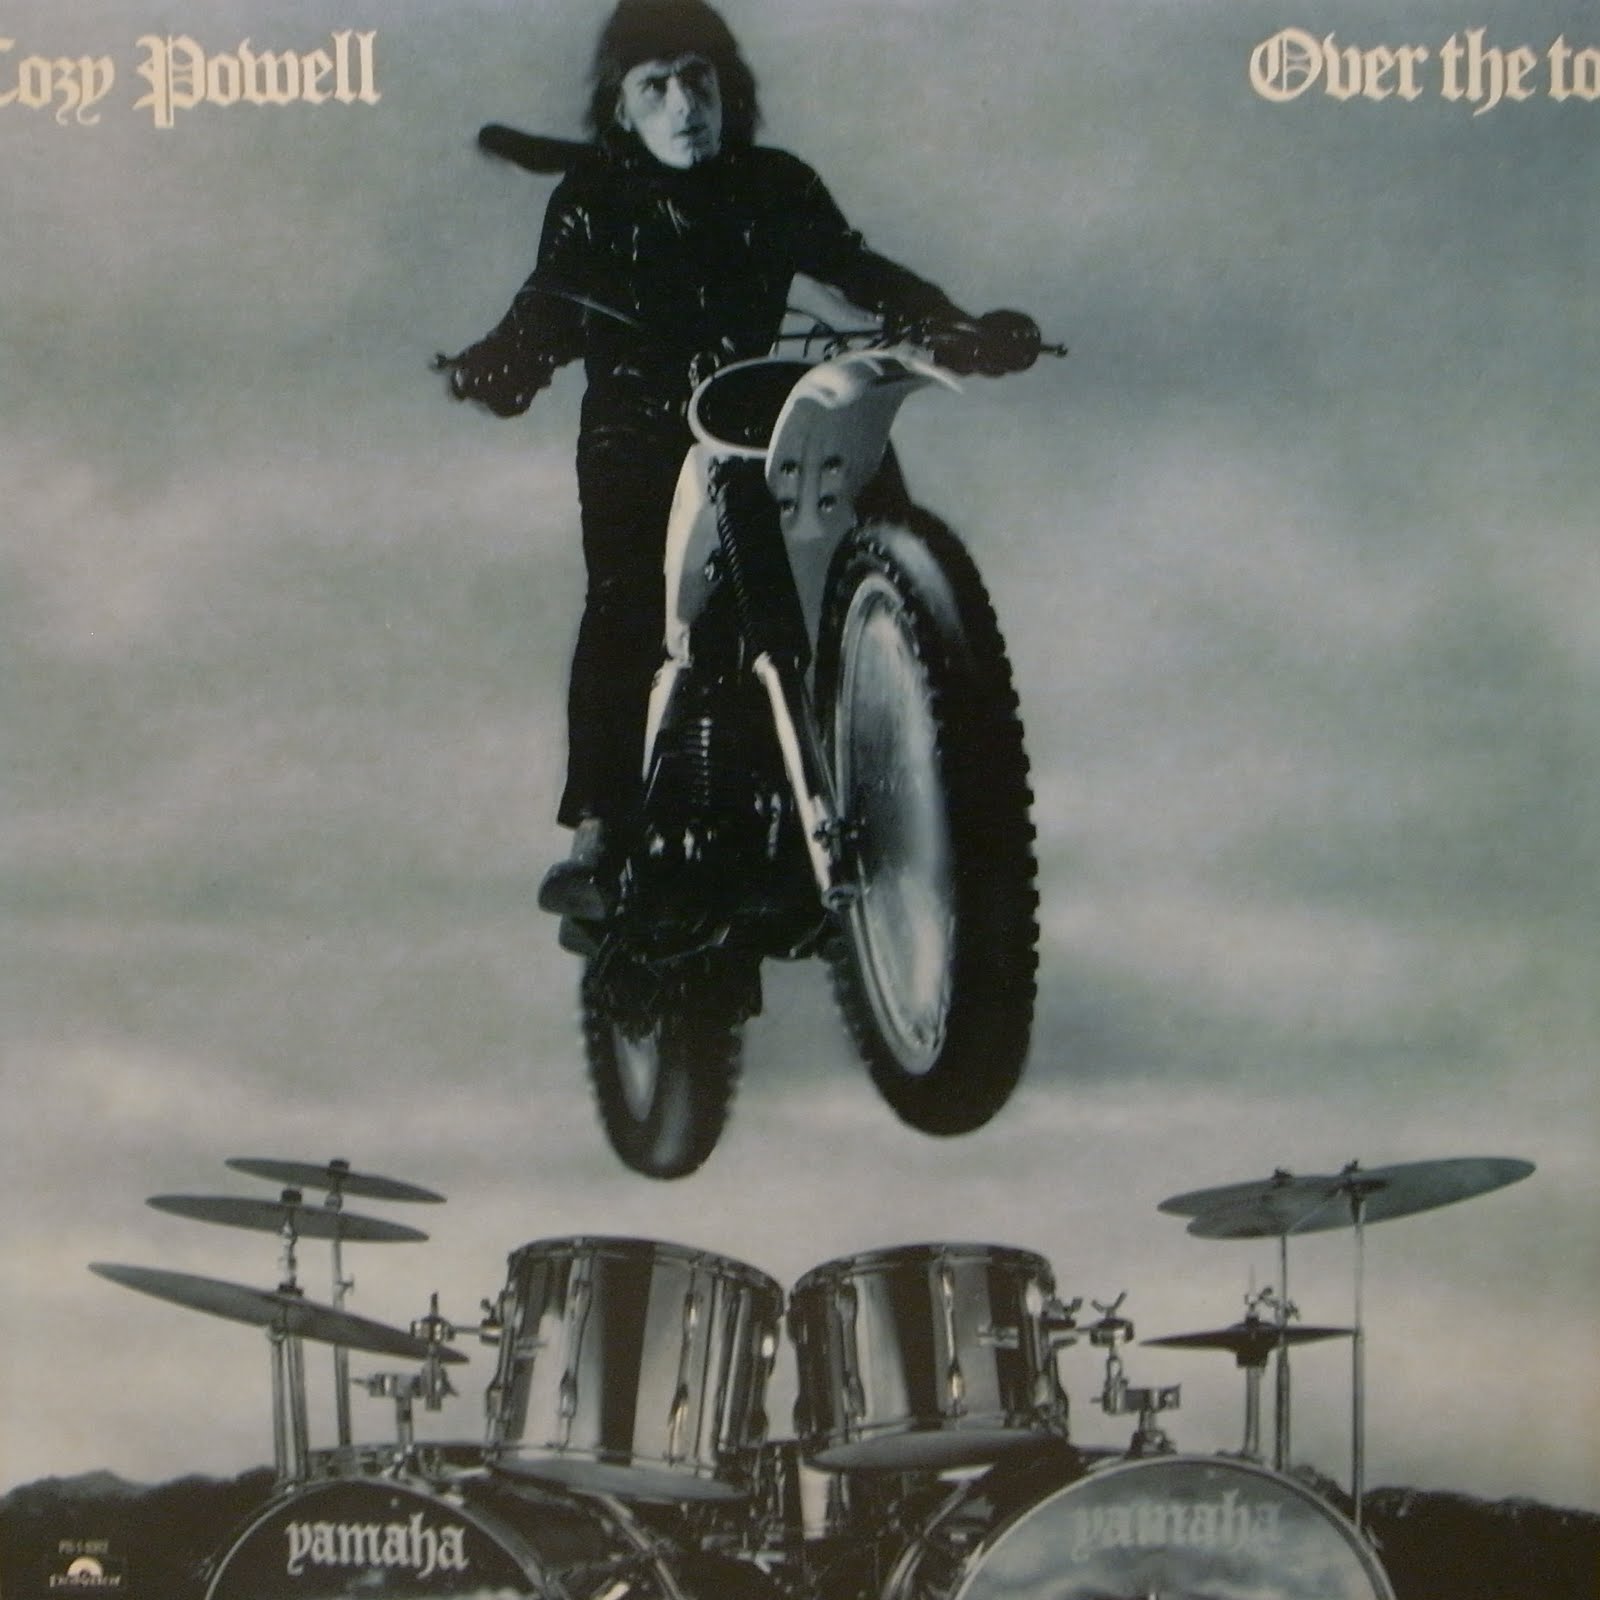 Cozy powell over the top